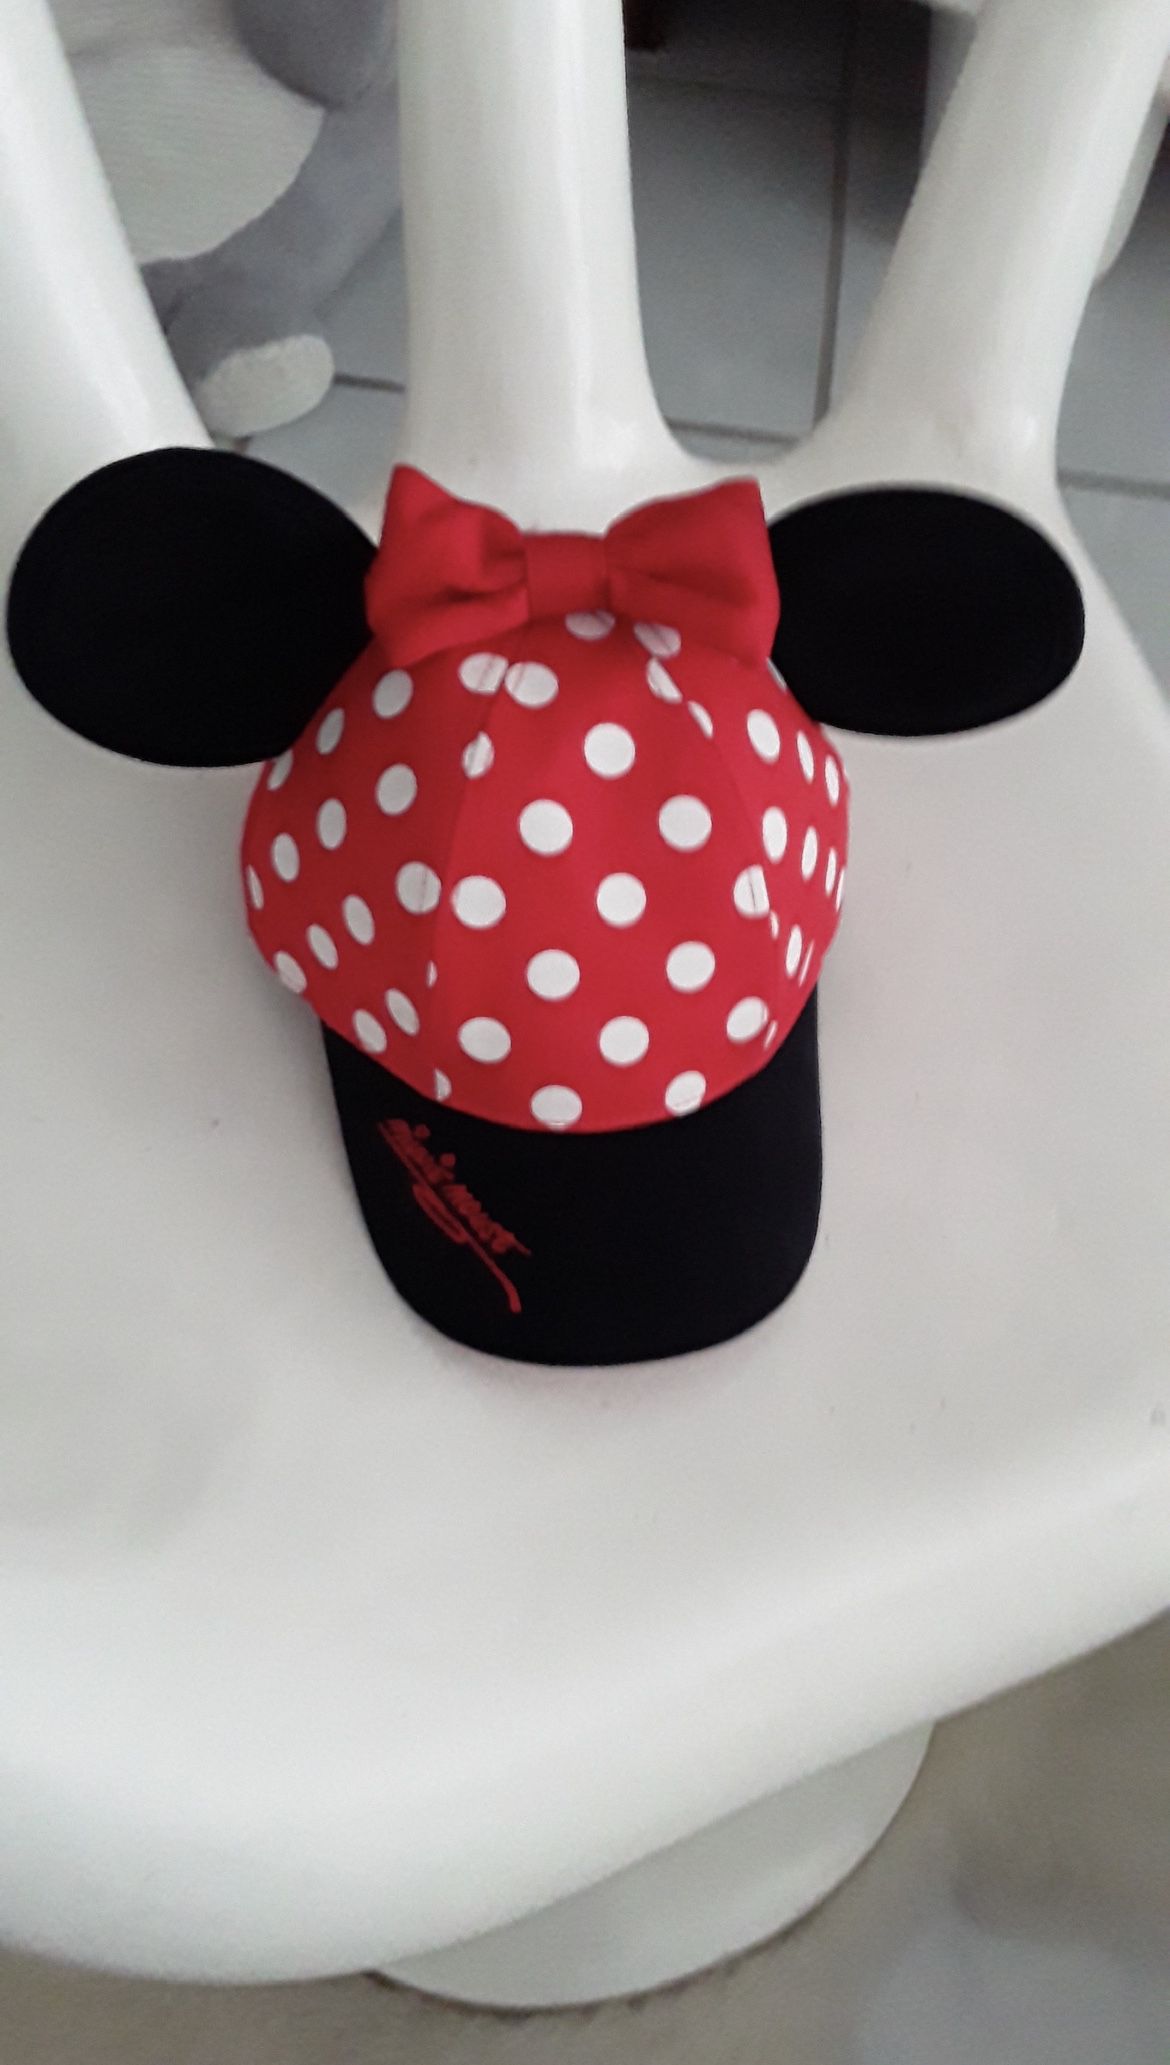 Disney Parks Authentic Minnie Mouse Baseball Cap with Ears